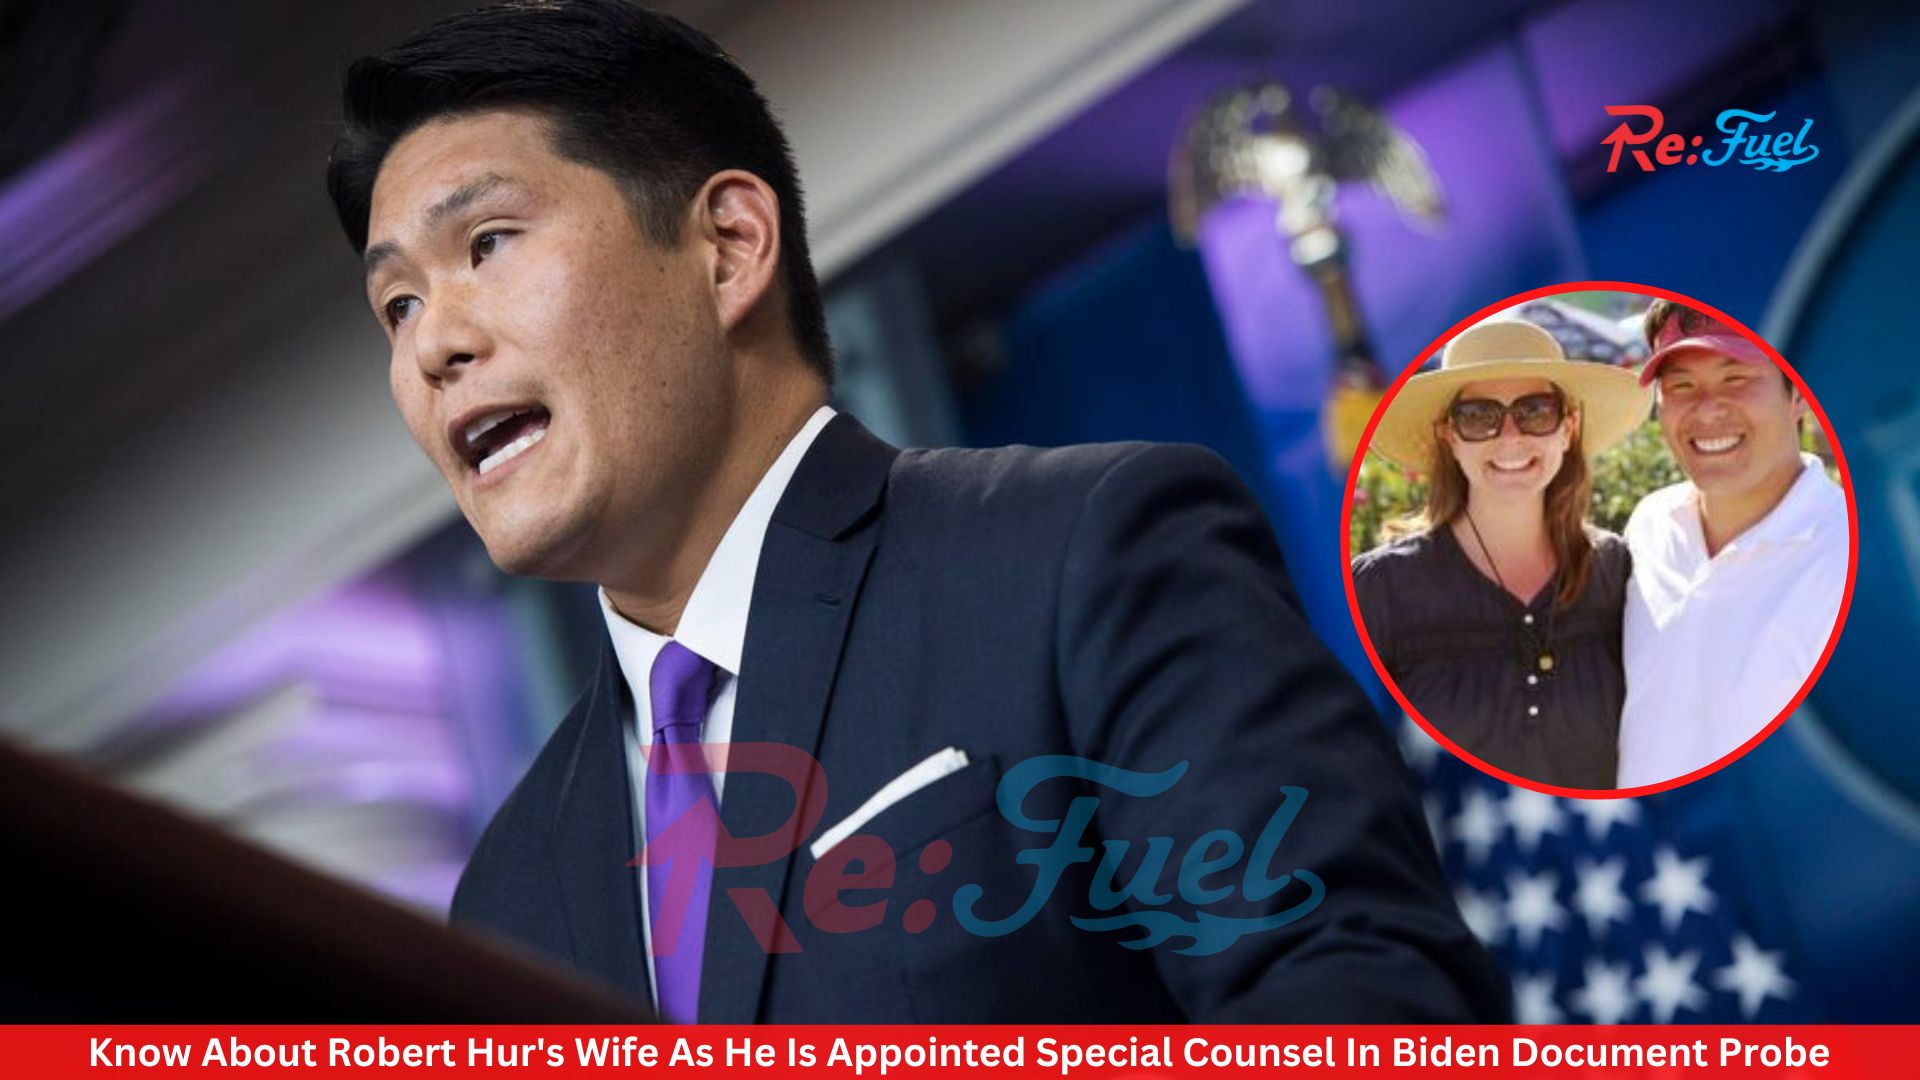 Know About Robert Hur's Wife As He Is Appointed Special Counsel In Biden Document Probe